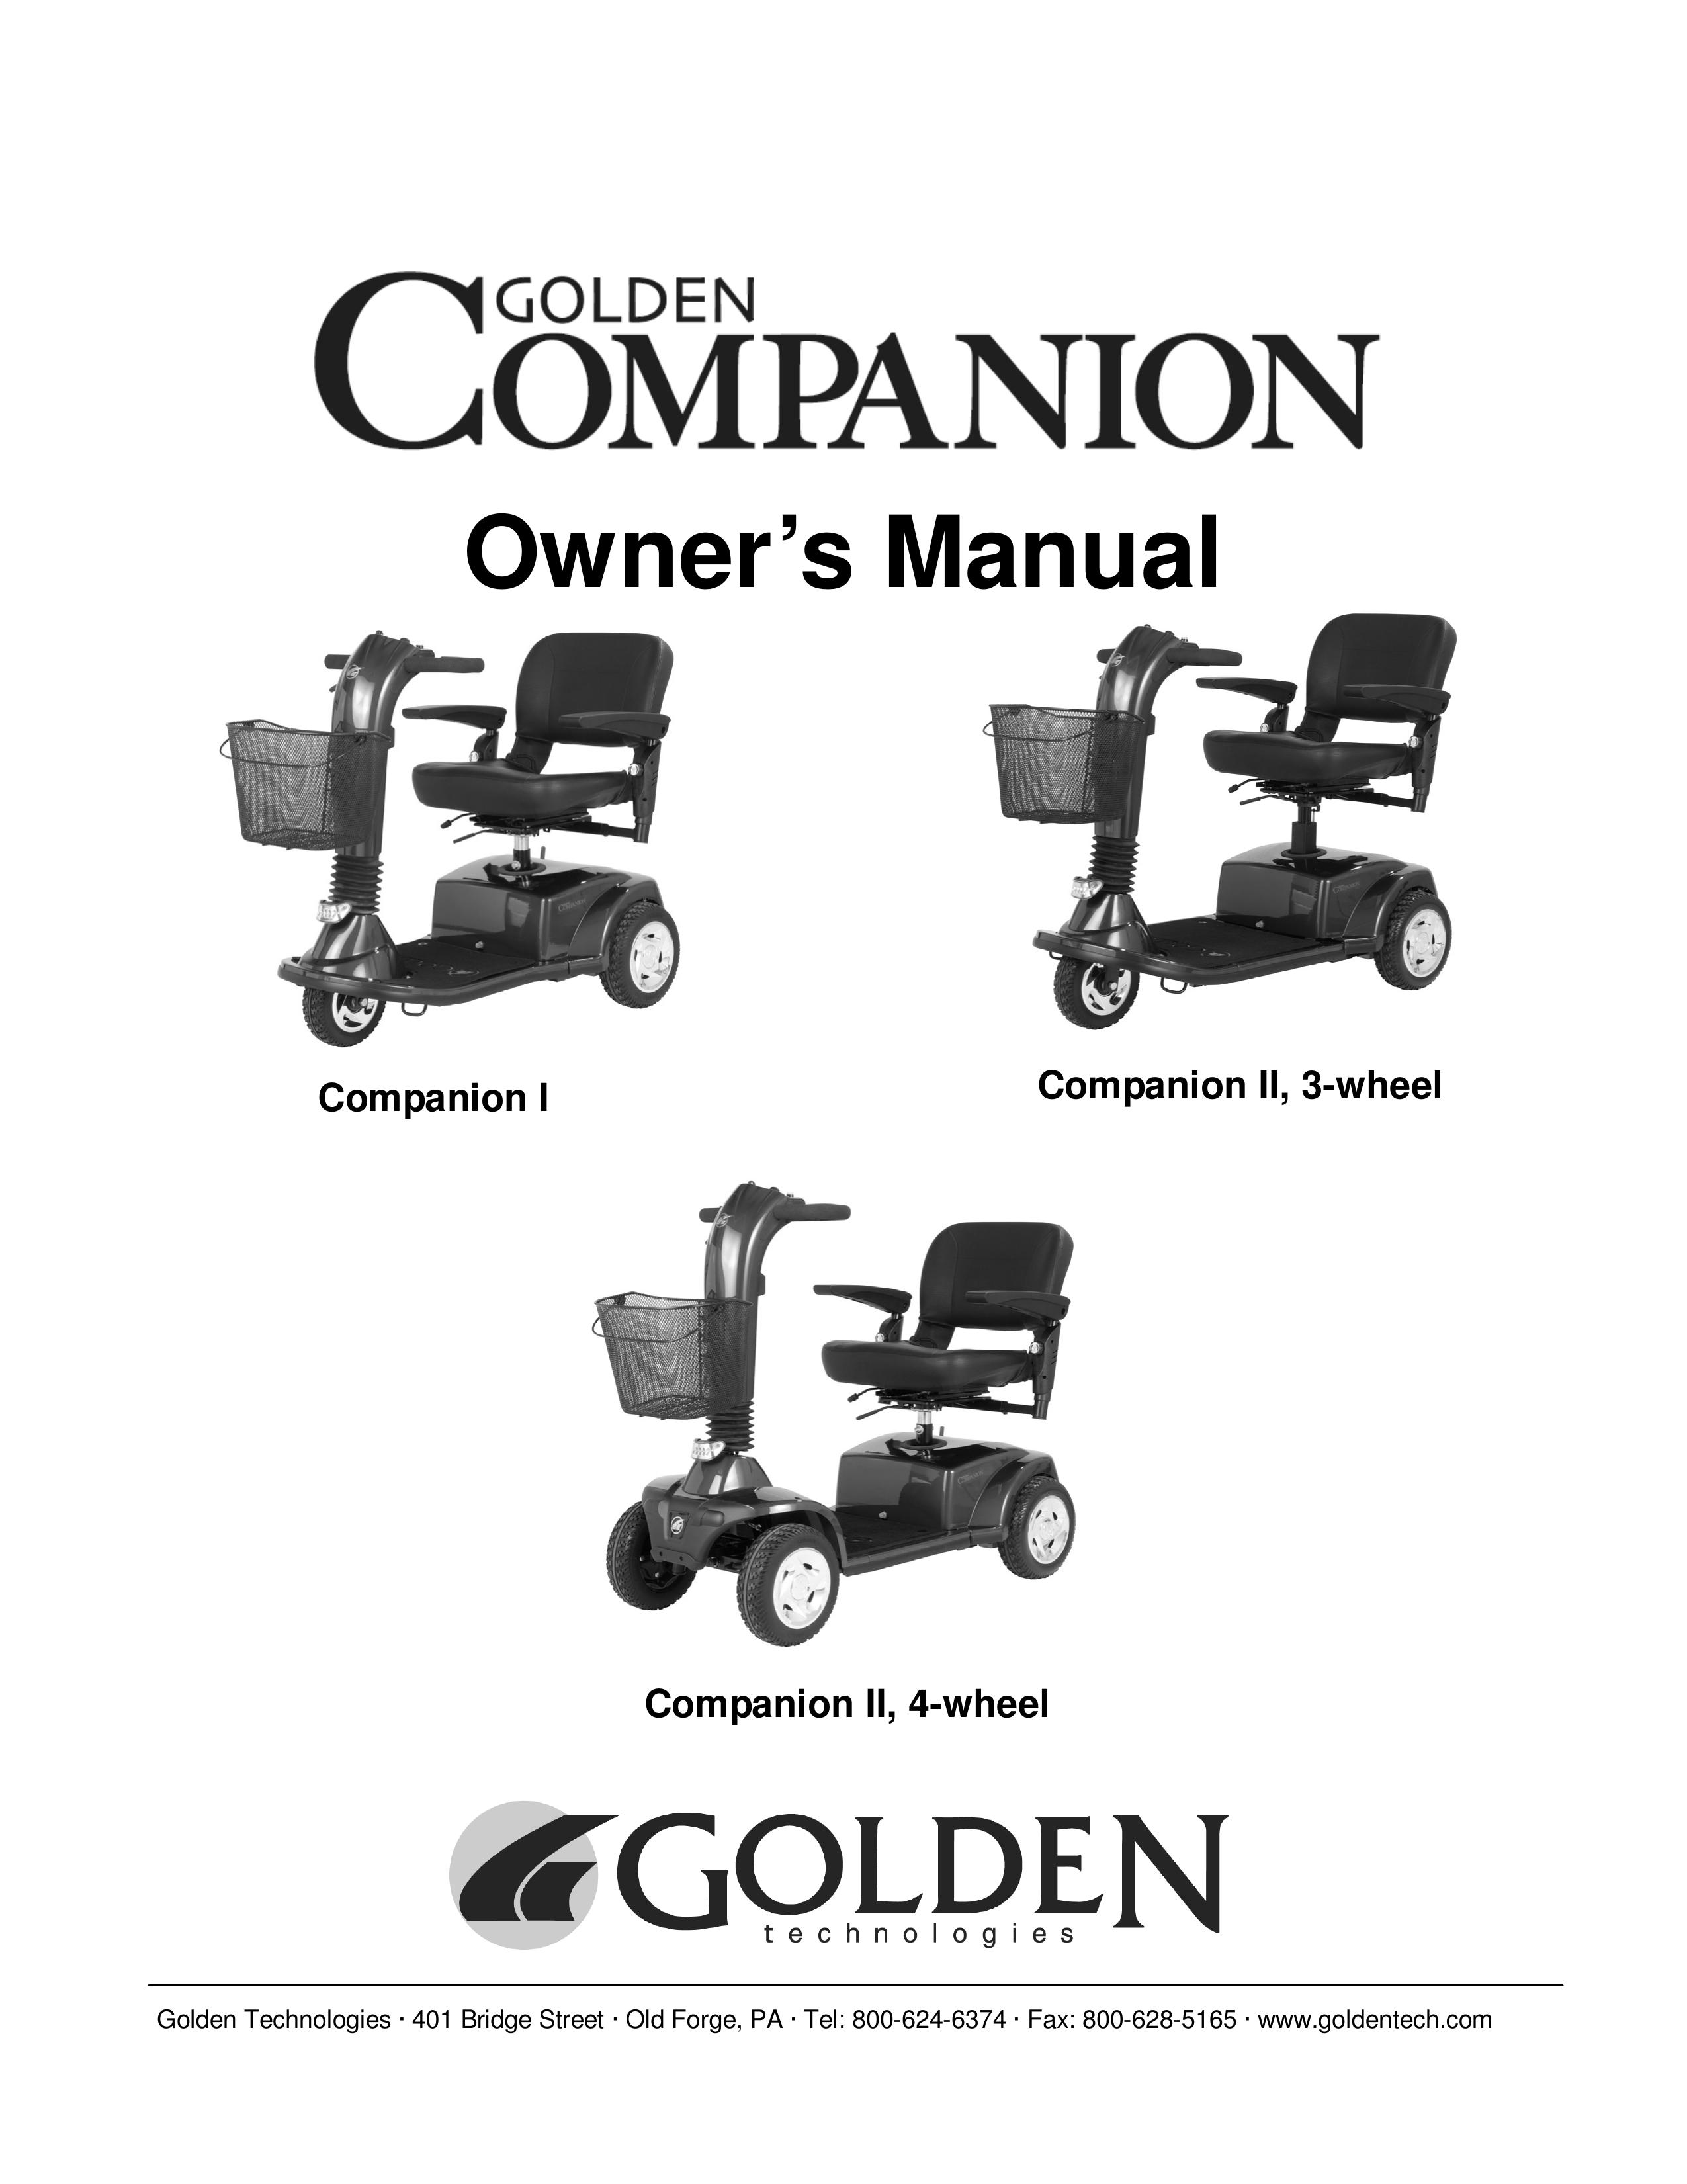 Golden Technologies GC240 Mobility Scooter User Manual